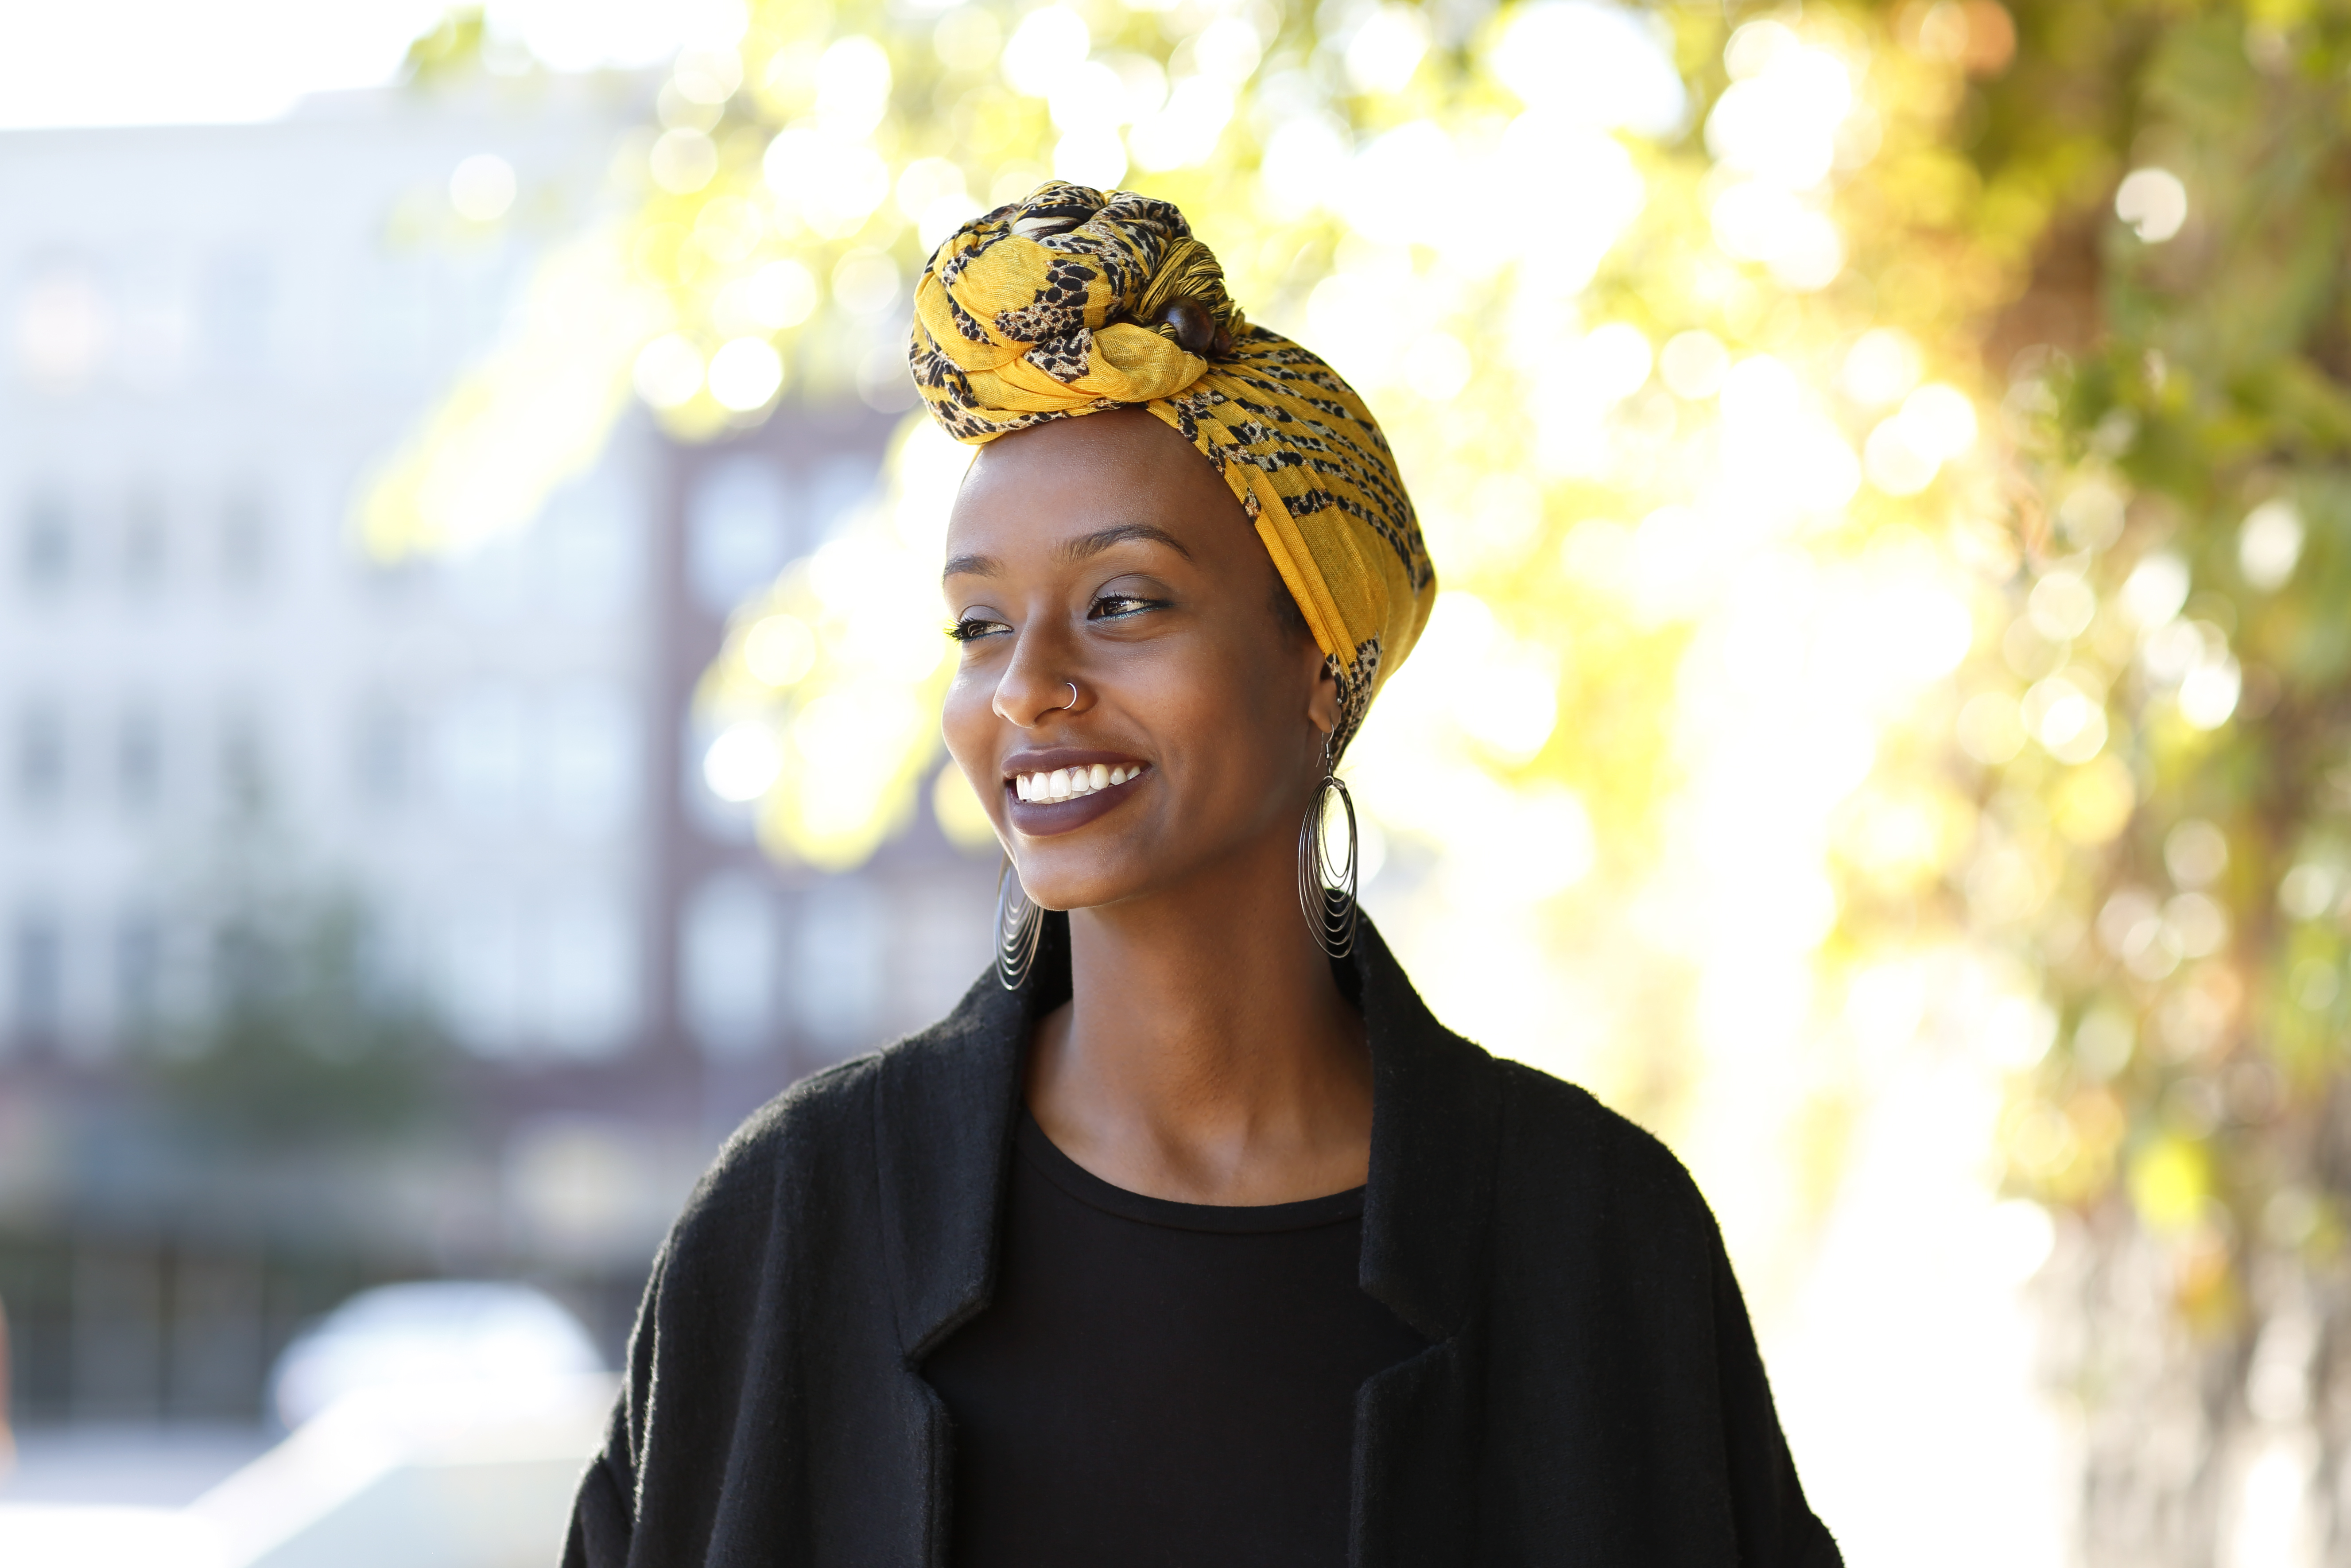 Beautiful, young, happy Muslim woman photographed in a bright outdoor urban setting wearing a yellow, decorated wrap around her head.